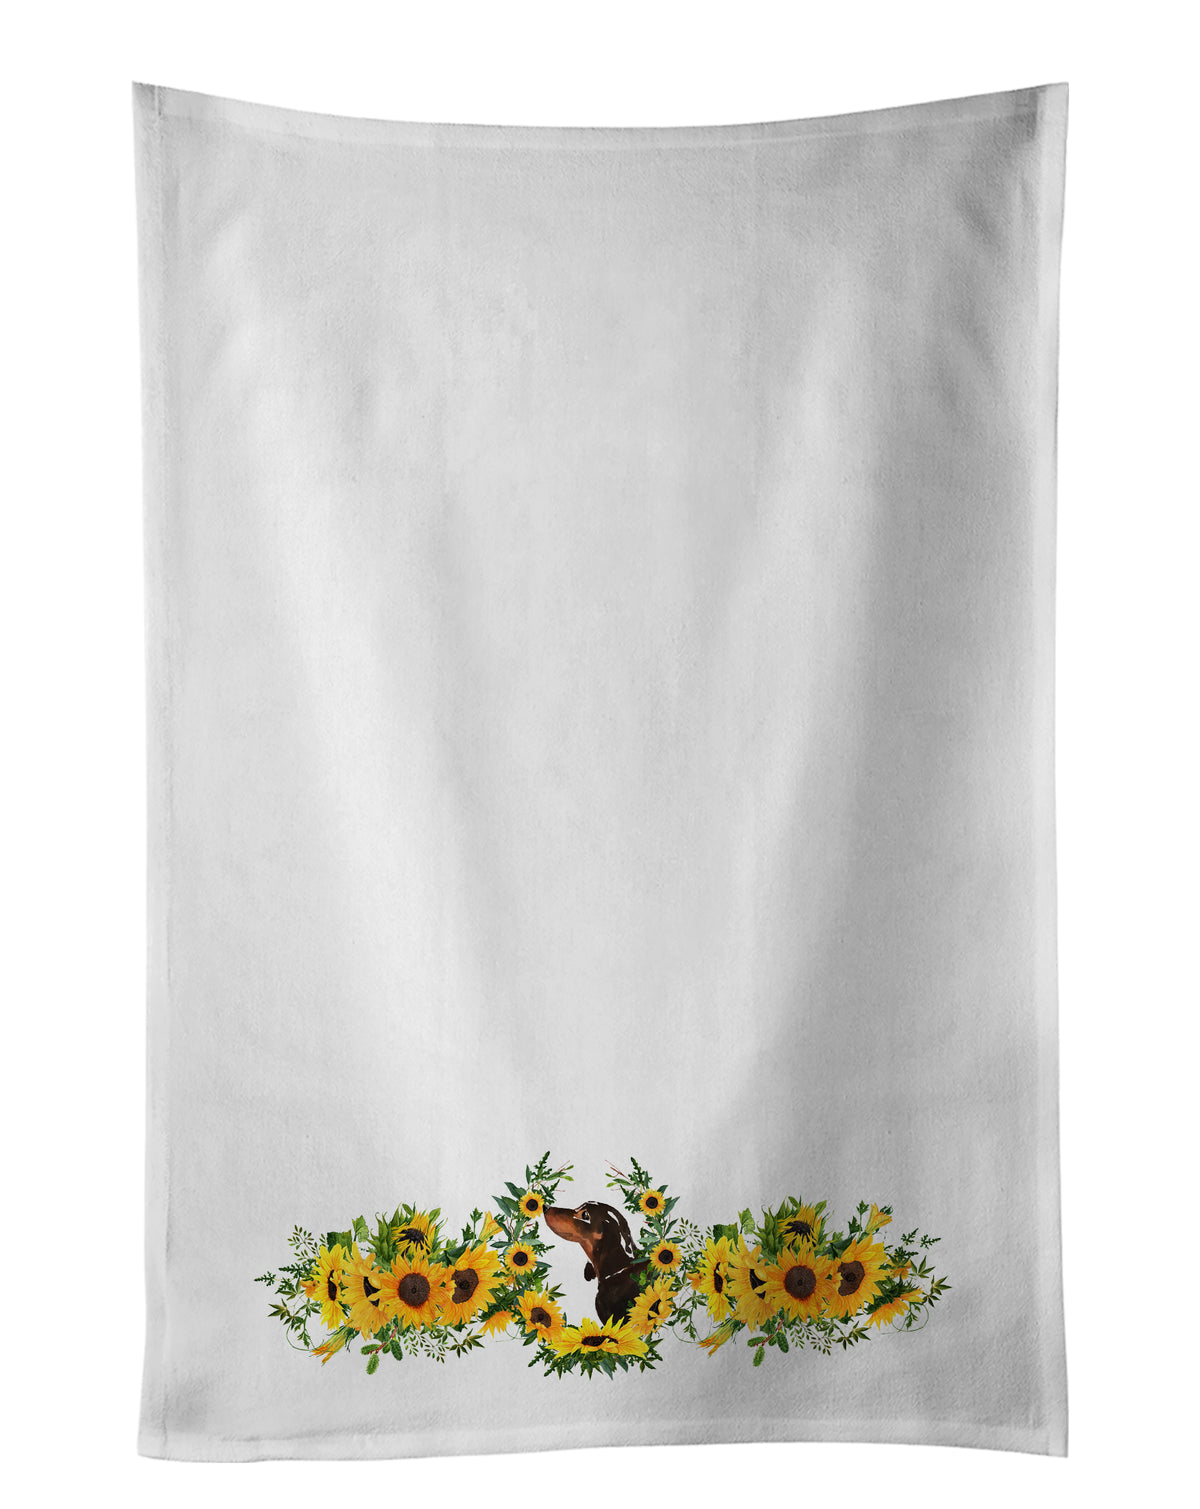 Buy this Red Tan Dachshund in Sunflowers White Kitchen Towel Set of 2